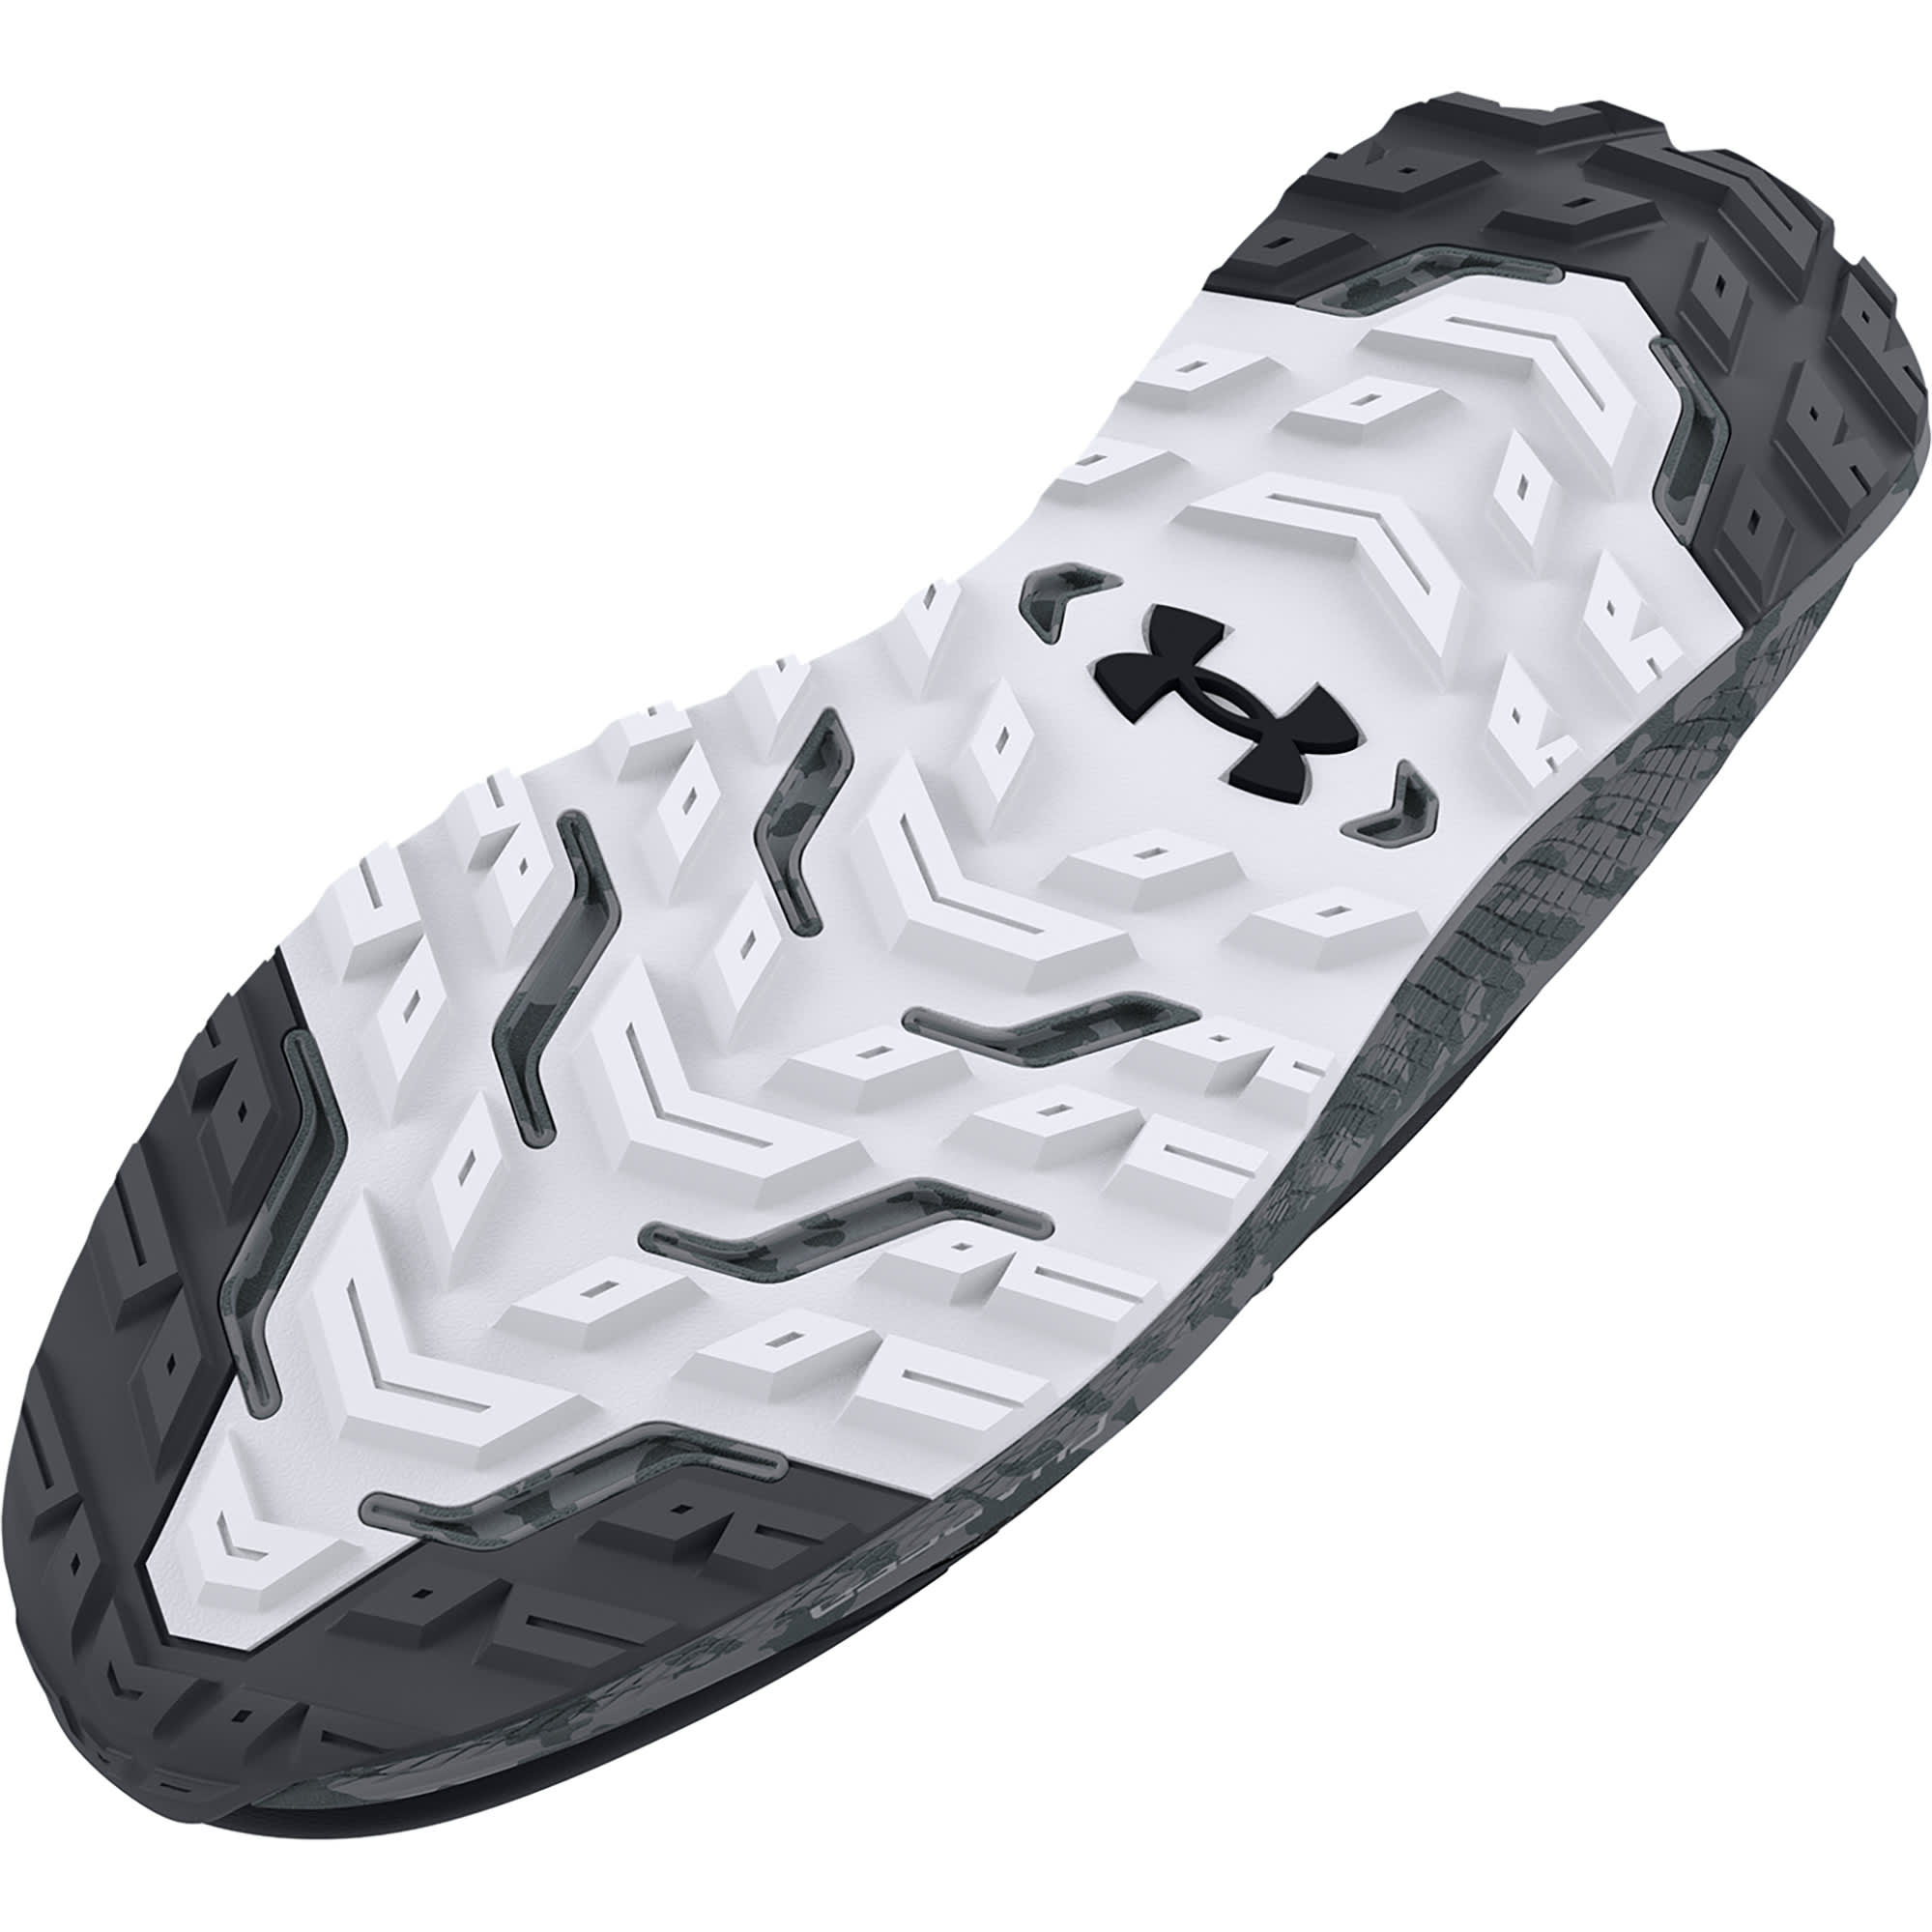 Ténis Under Armour Charged Bandit Trail 2